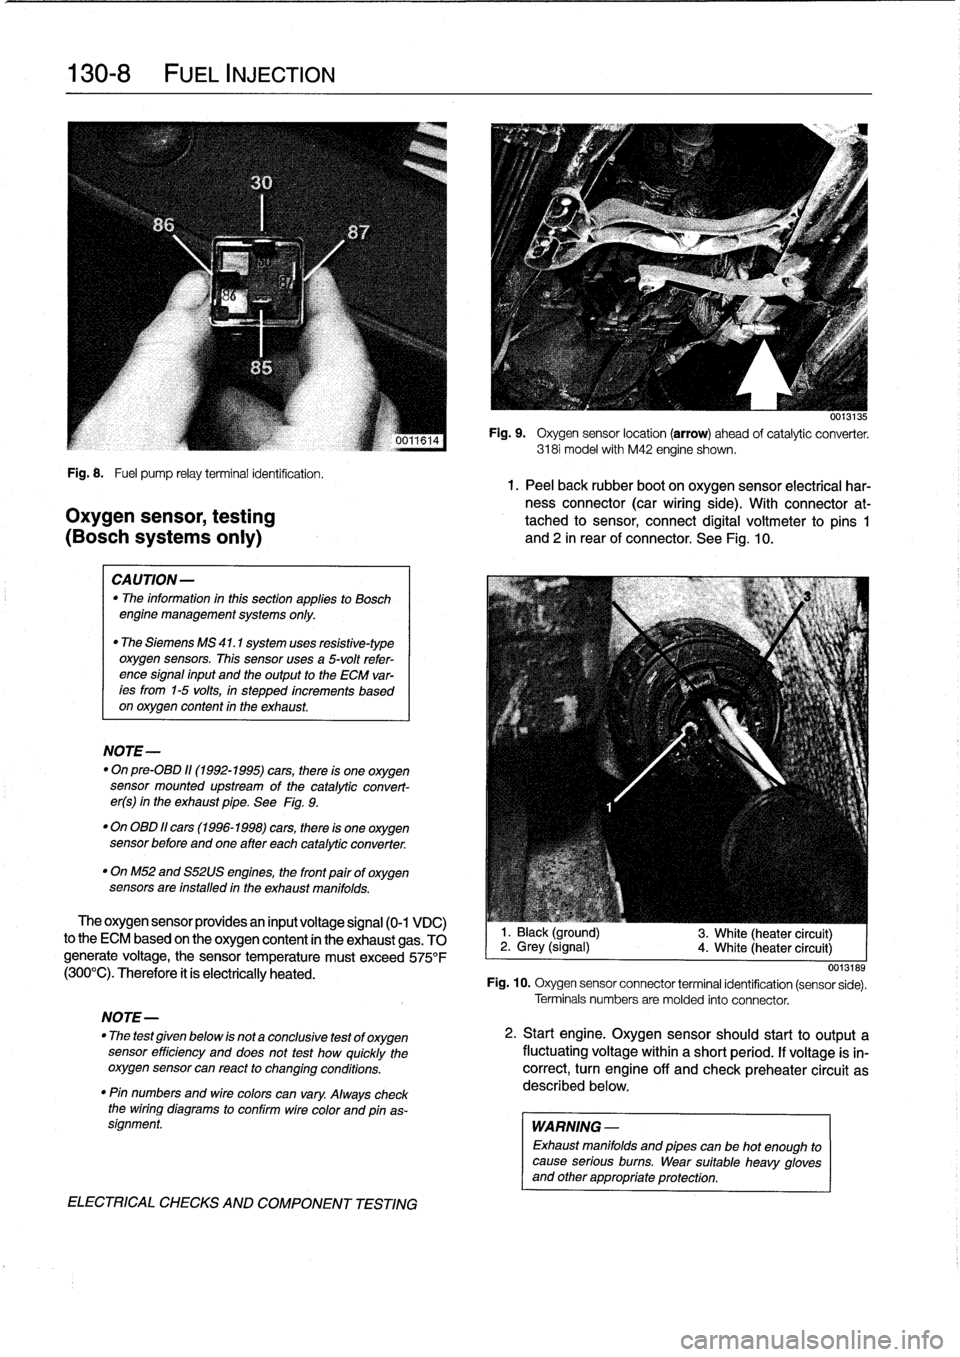 BMW 323i 1995 E36 Workshop Manual 
130-
8

	

FUEL
INJECTION

Fig
.
8
.

	

Fuel
pump
relayterminal
identification
.
1.
Peel
back
rubber
boot
on
oxygen
sensor
electrical
har-
ness
connector
(car
wiring
side)
.
With
connector
at-
Oxyge